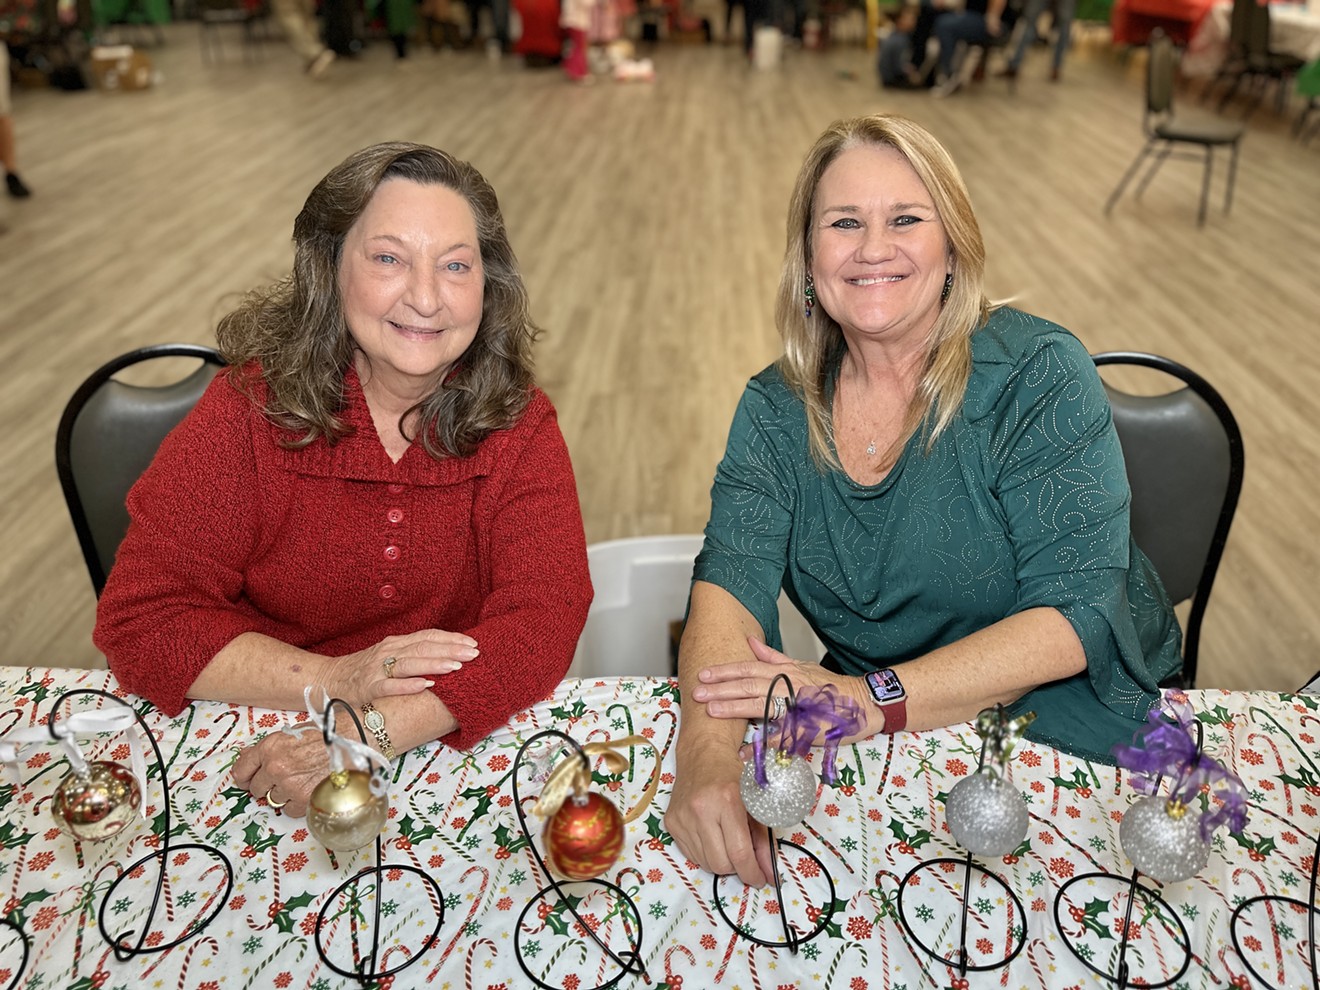 Alee Shriners Children's Christmas Party